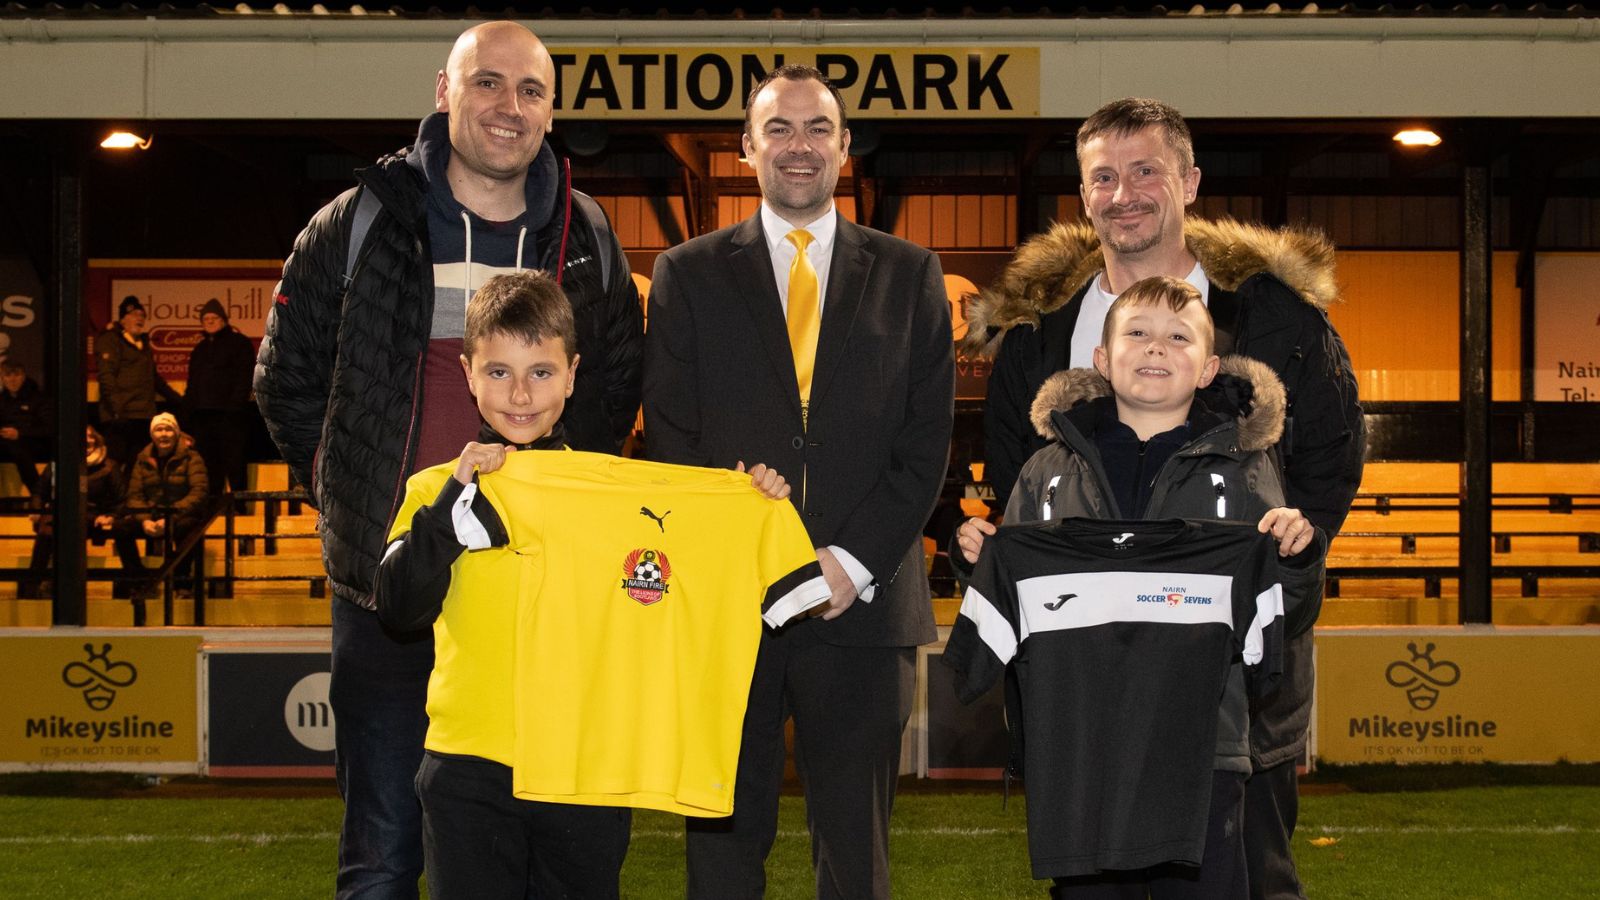 Nairn County, Nairn Fire and Nairn Soccer 7s join forces to improve youth football opportunities in Nairn